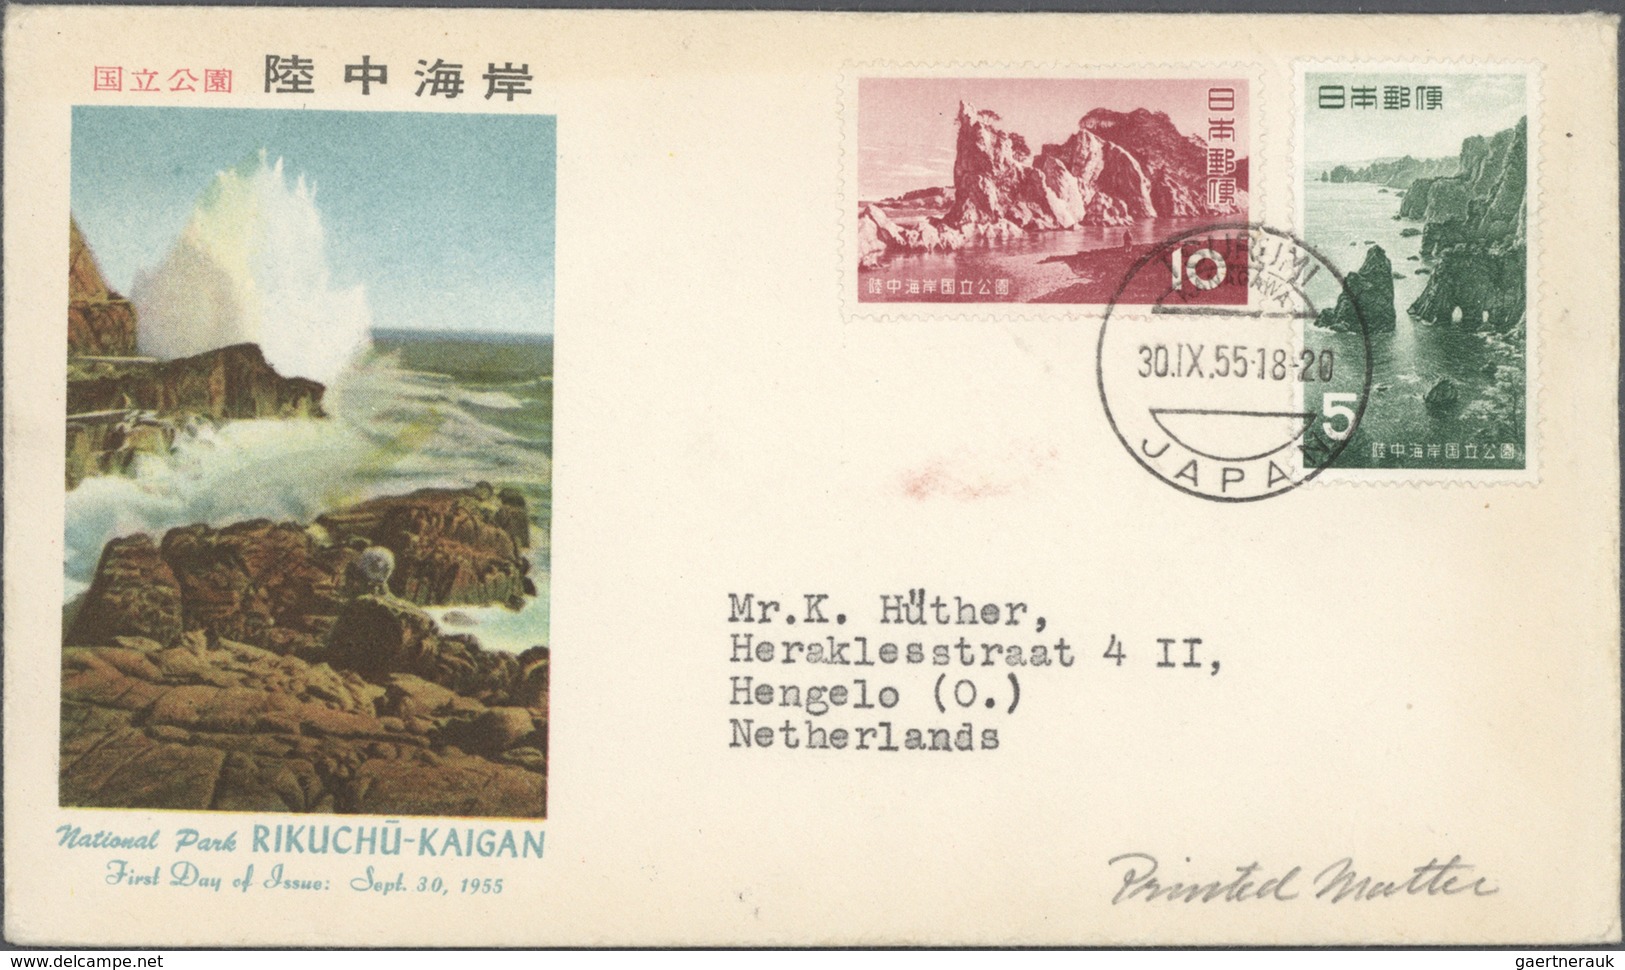 Japan: 1949/2004 (ca.) inc. some pre-WWII, 1000s of FDC in large- (22) or small cover books (16), ma